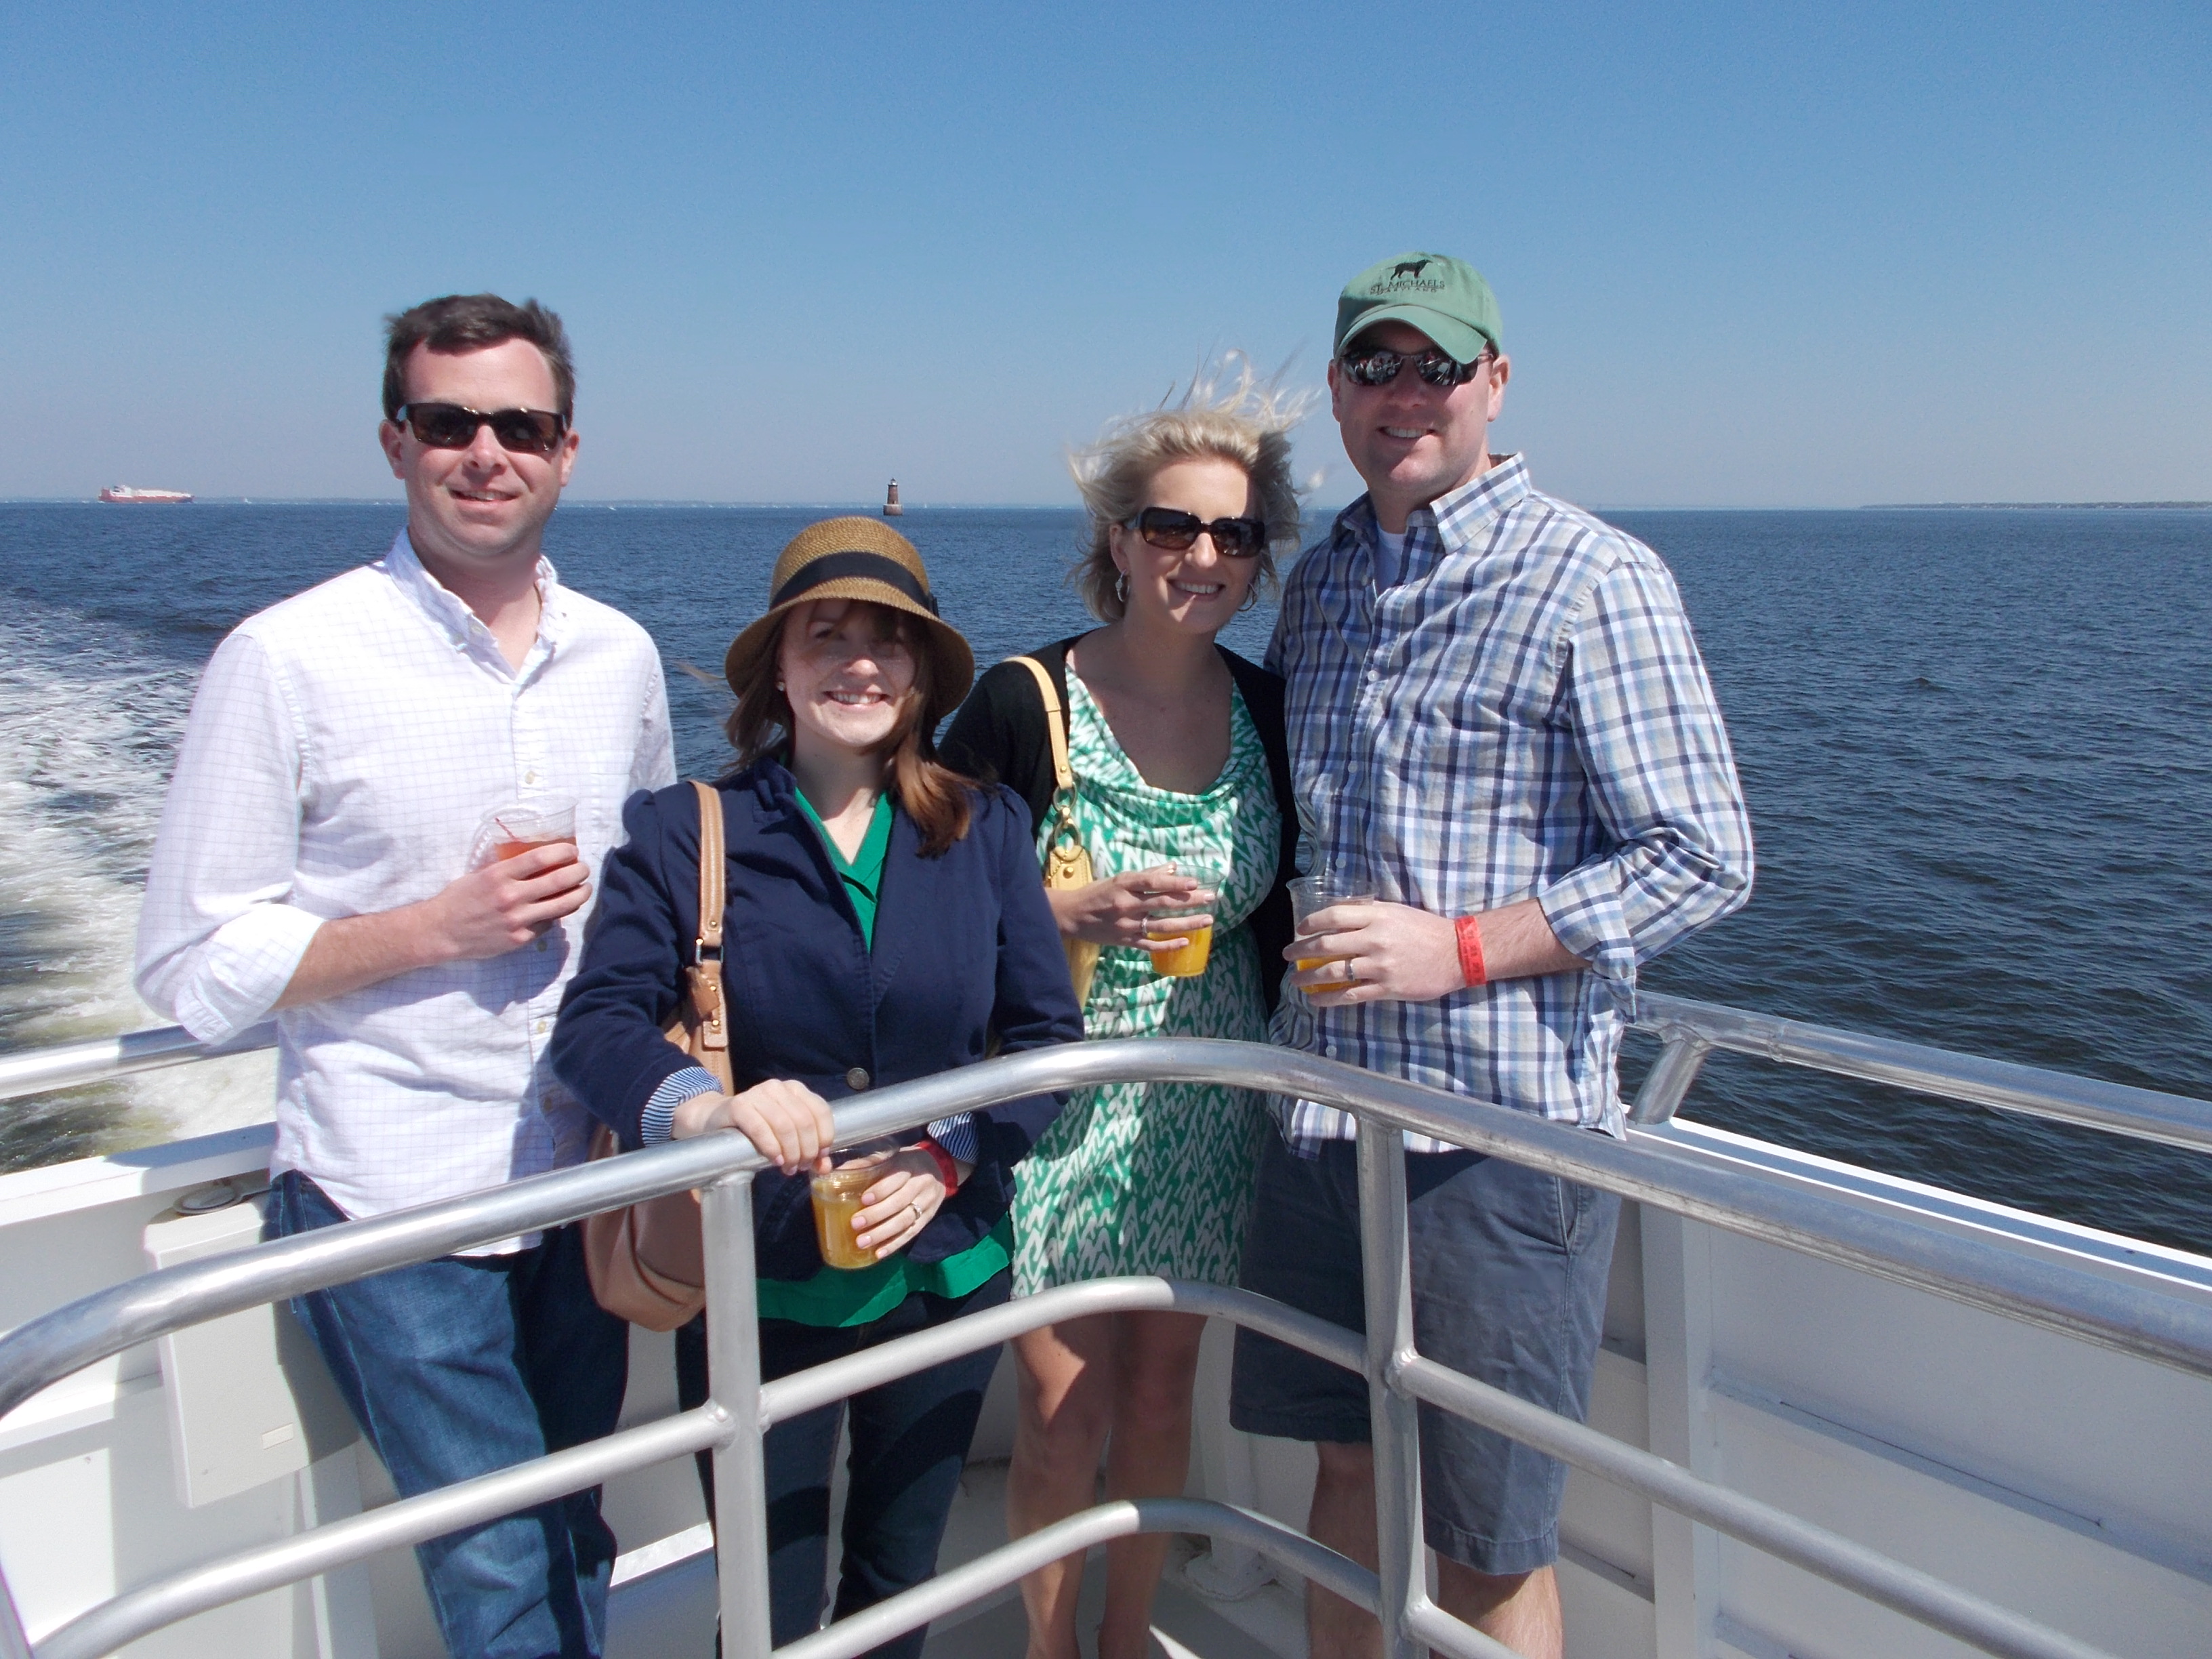 Cruise to the St. Michael's Wine Festival with Watermark Eye On